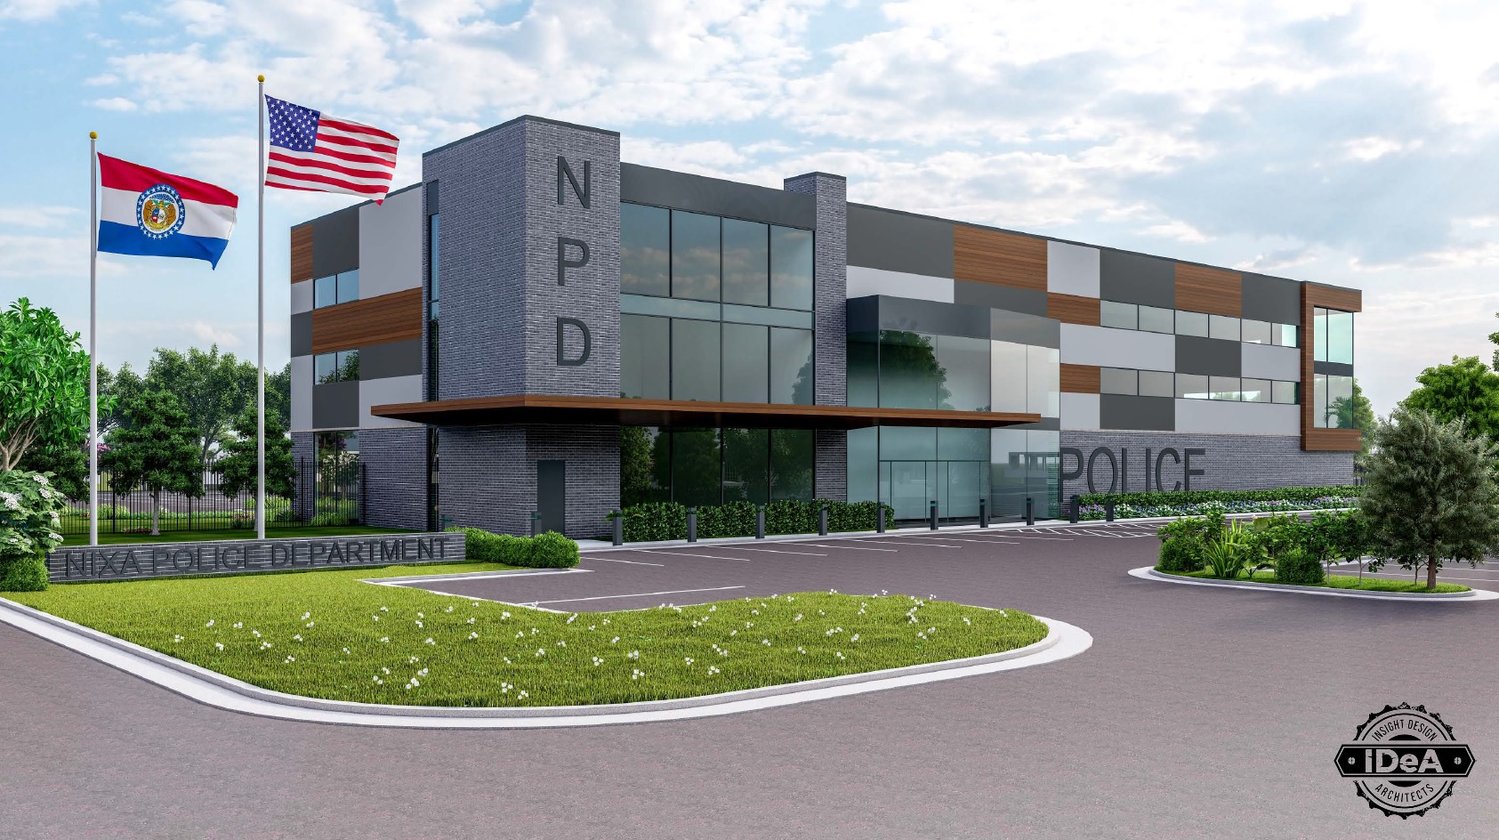 The Nixa Police Department's proposed new headquarters would have space to grow into over the next several years.